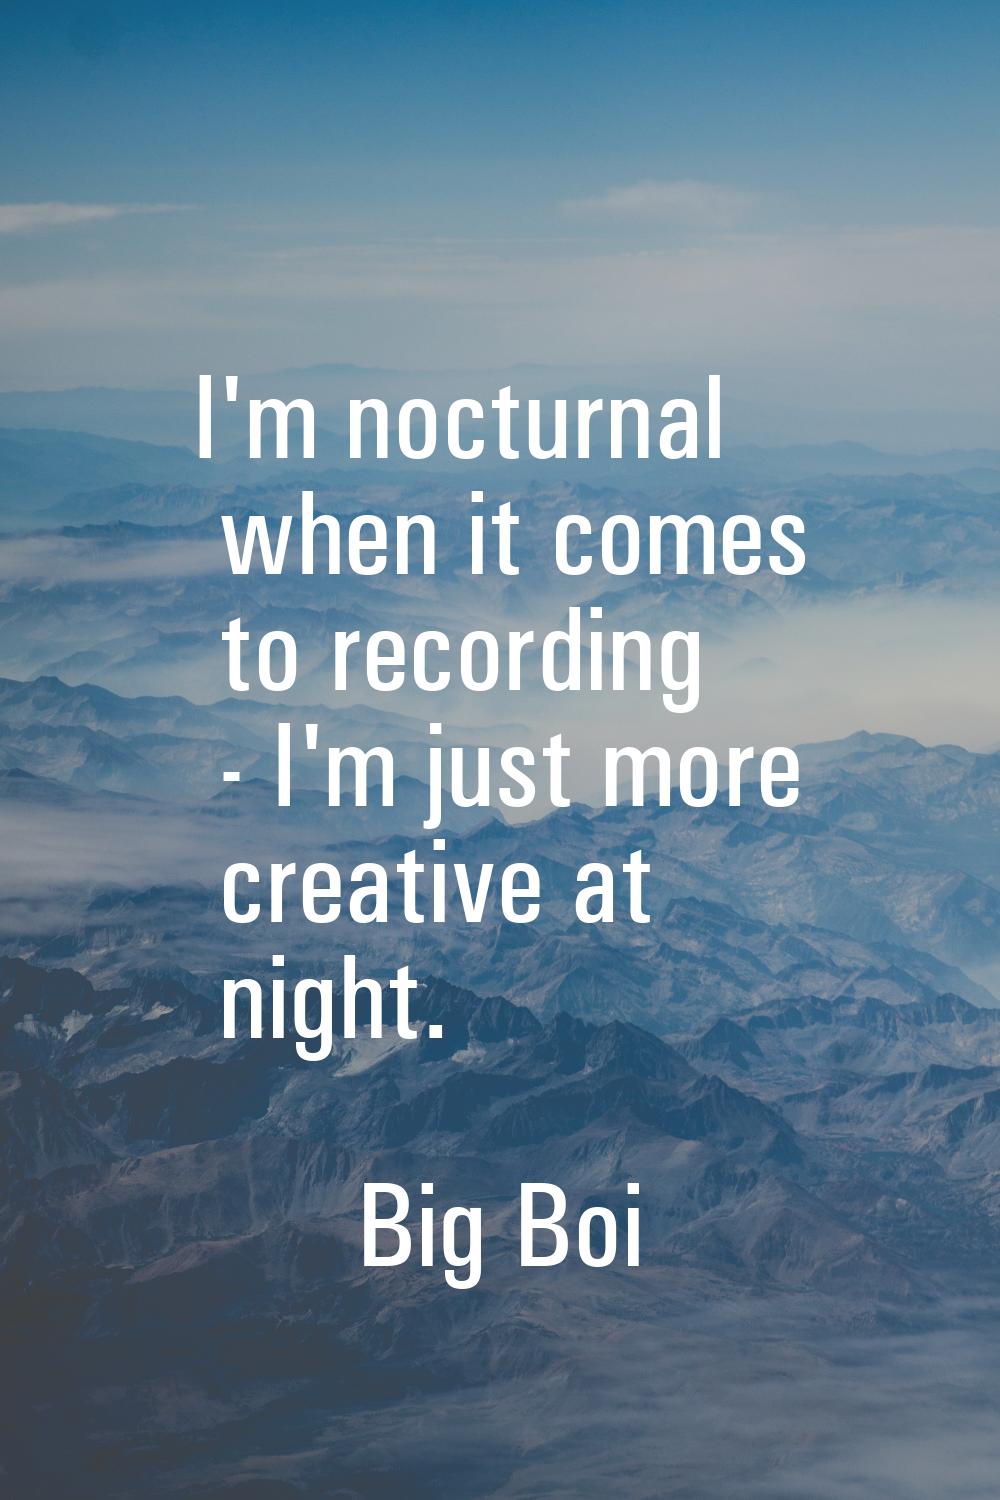 I'm nocturnal when it comes to recording - I'm just more creative at night.